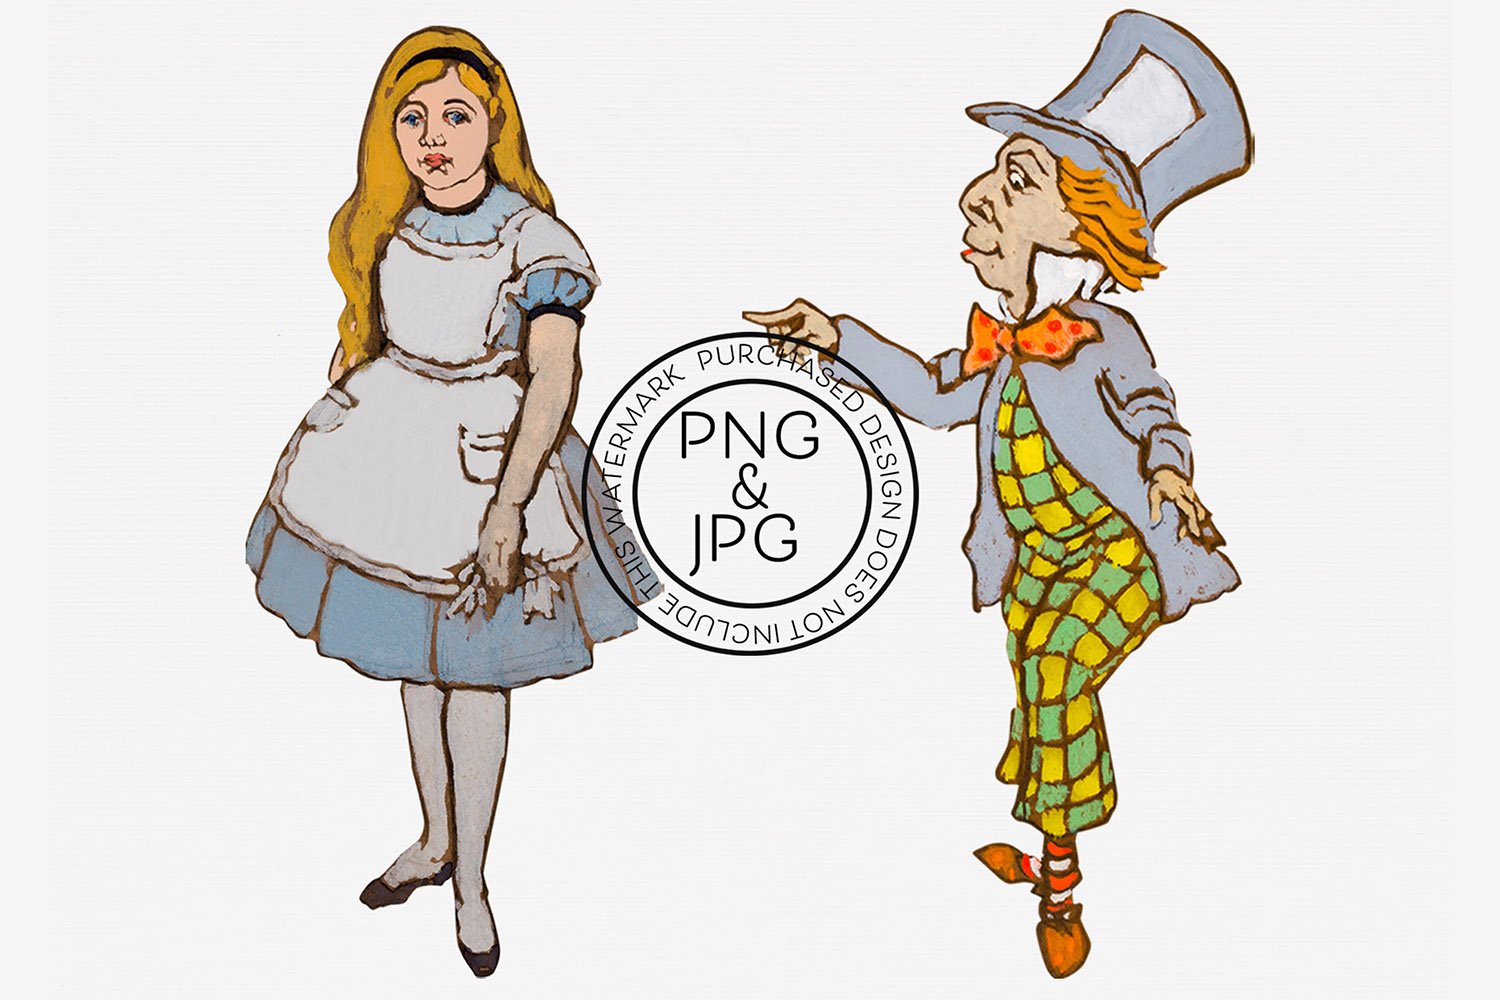 Alice and the Hatter in the picture.